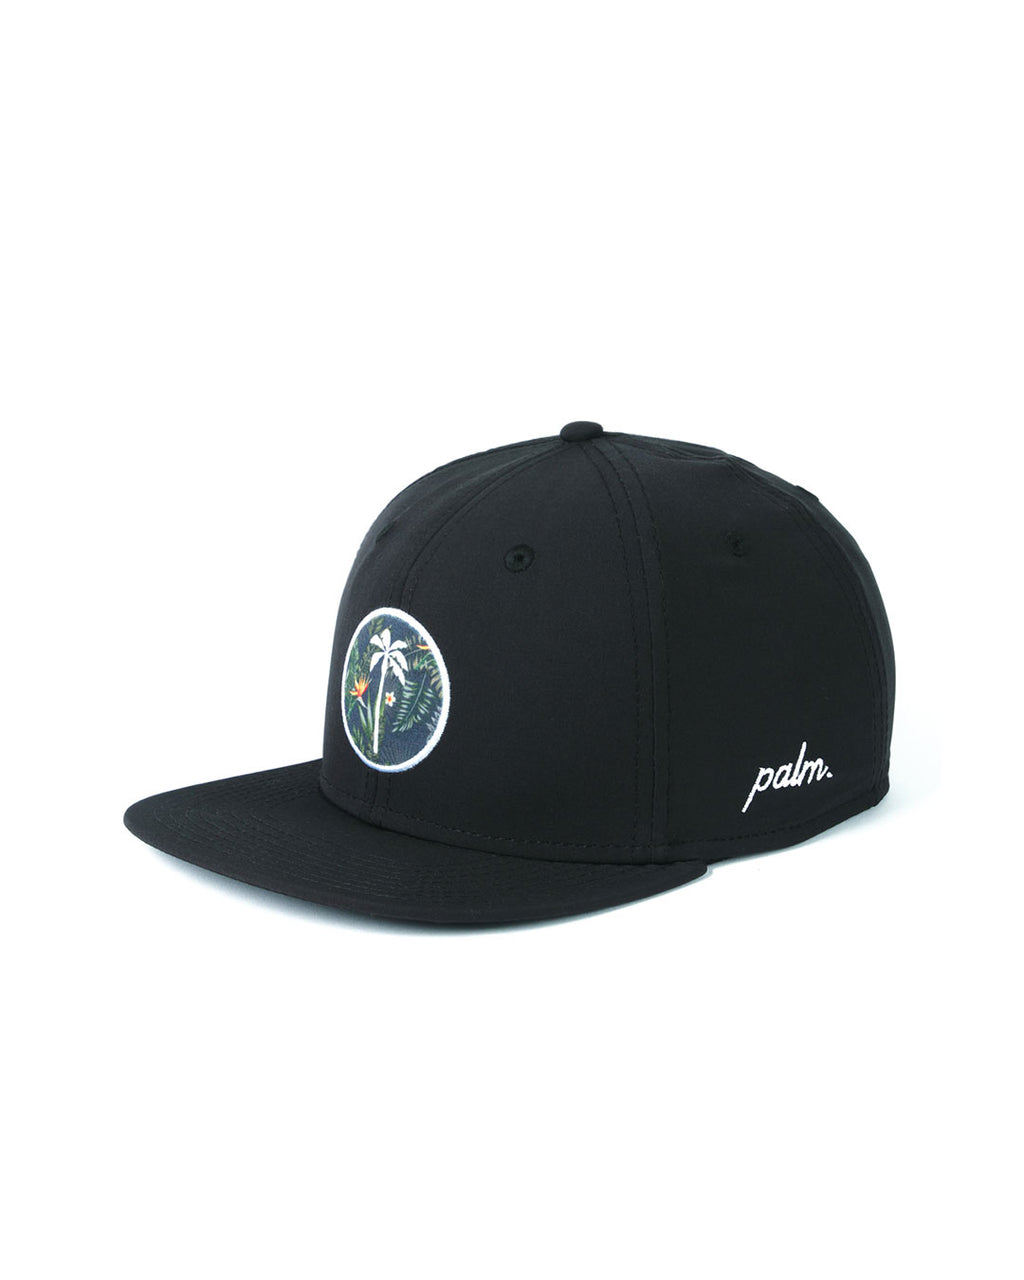 Palm Golf Co.  Youth Local Performance Snapback